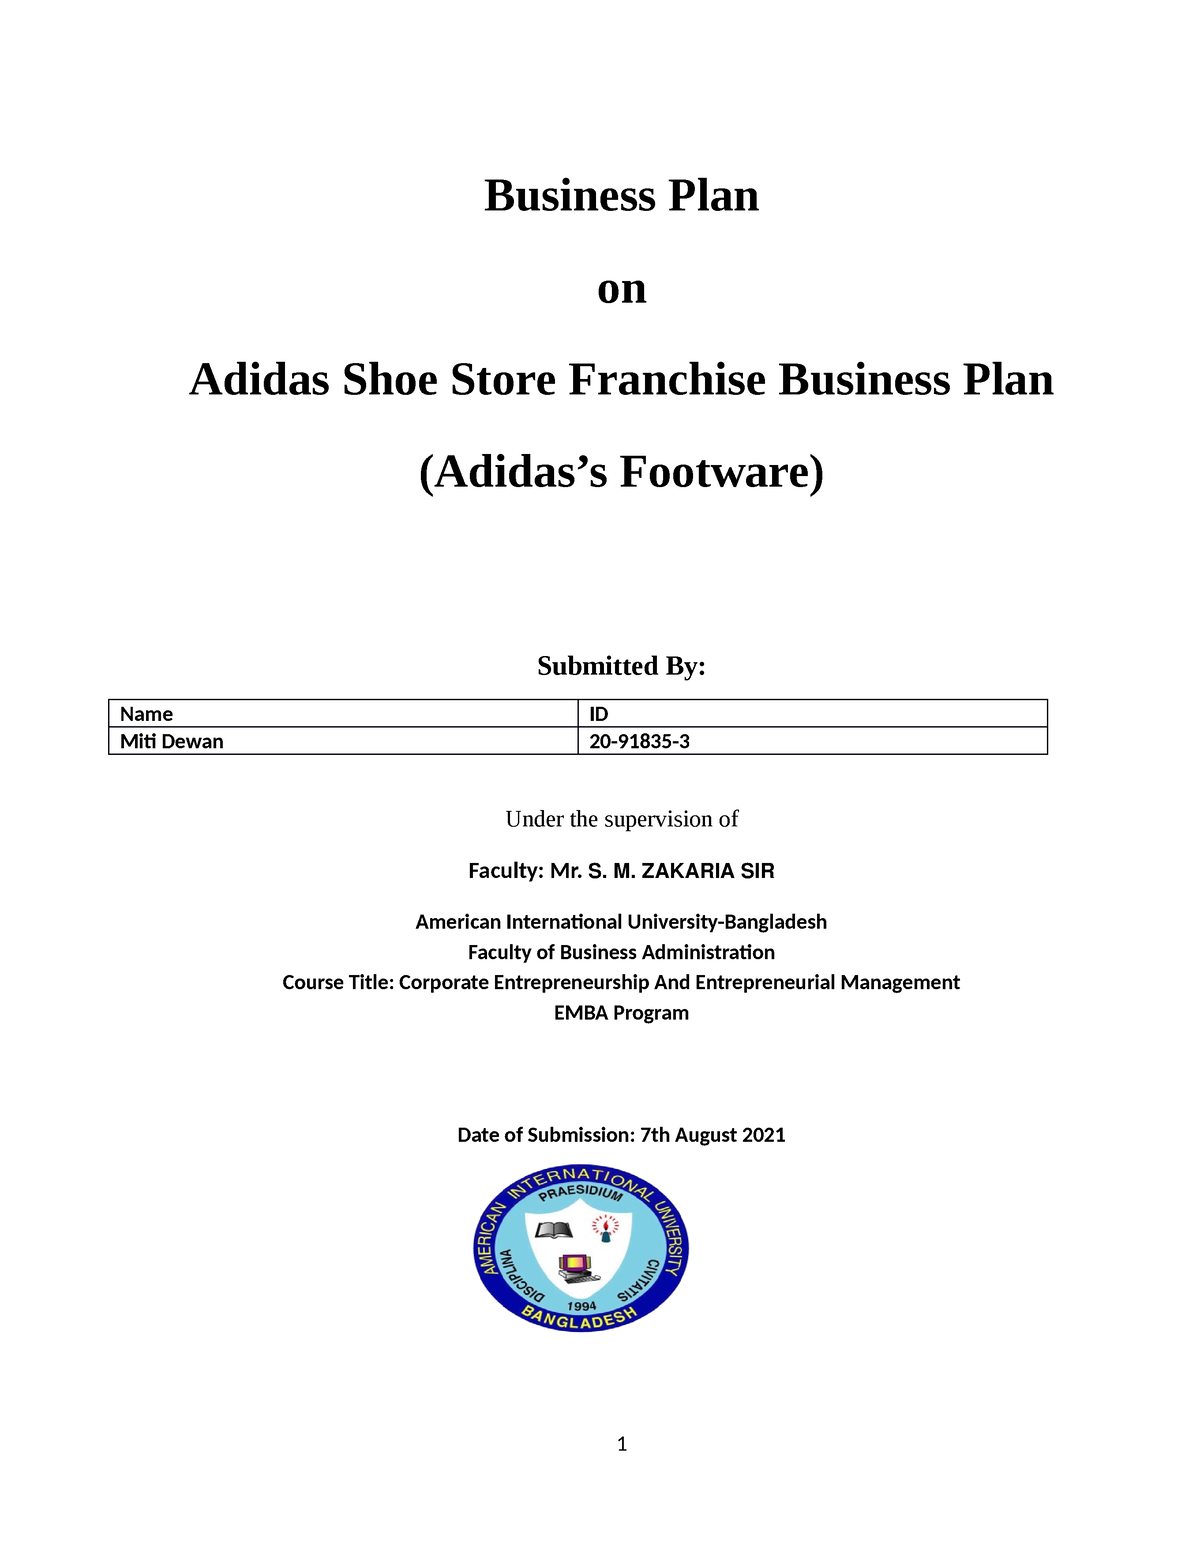 business plan for adidas